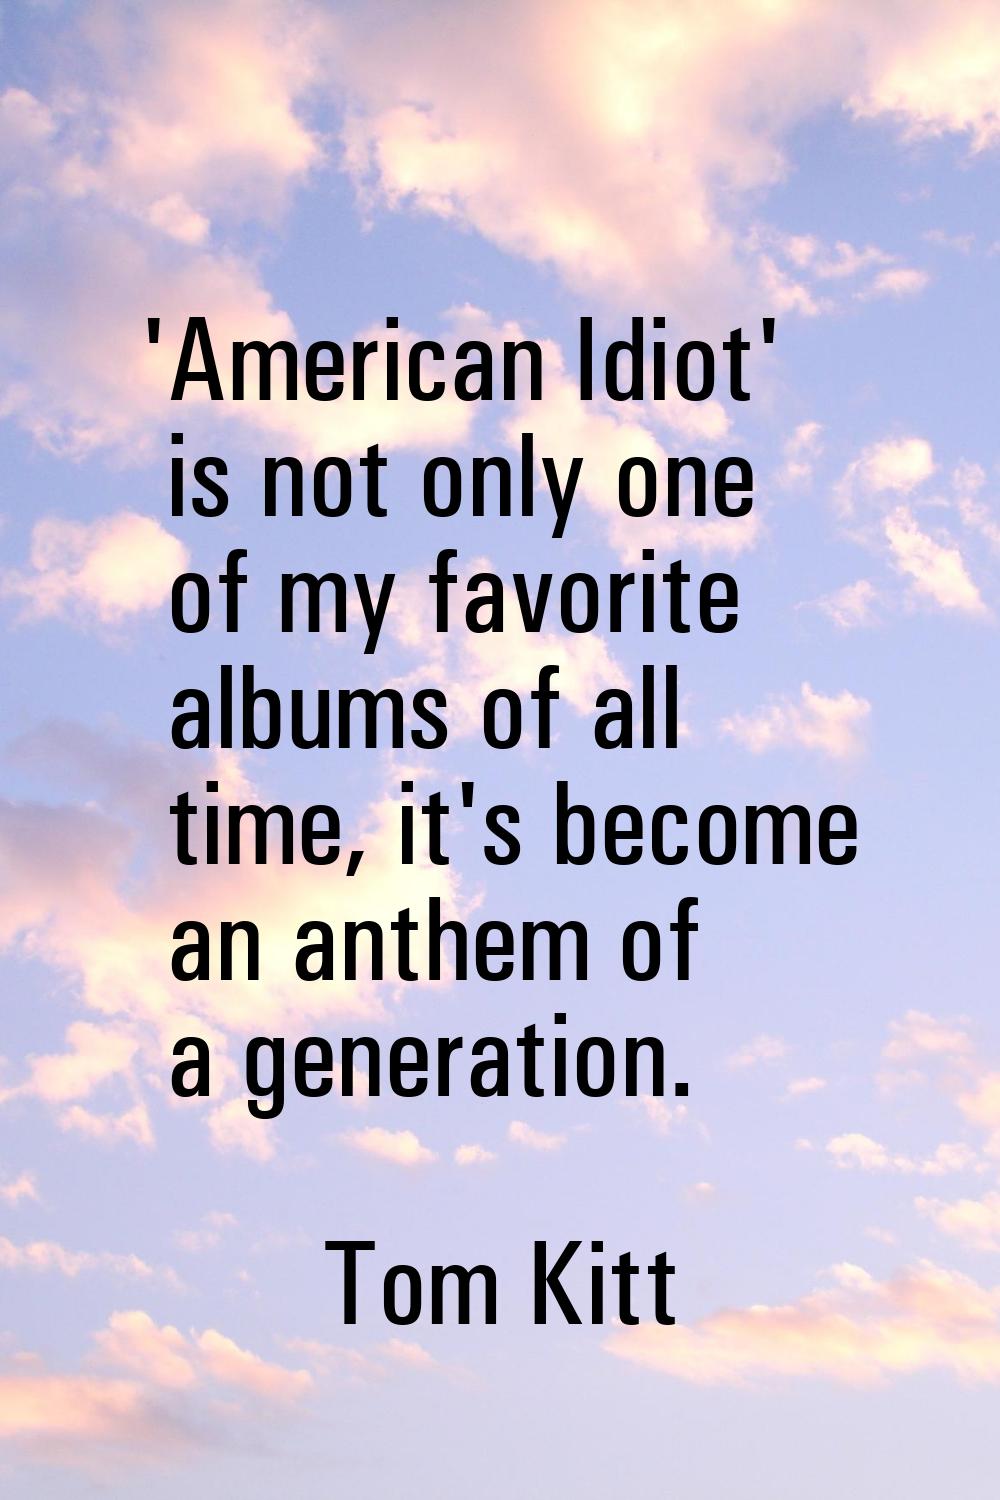 'American Idiot' is not only one of my favorite albums of all time, it's become an anthem of a gene